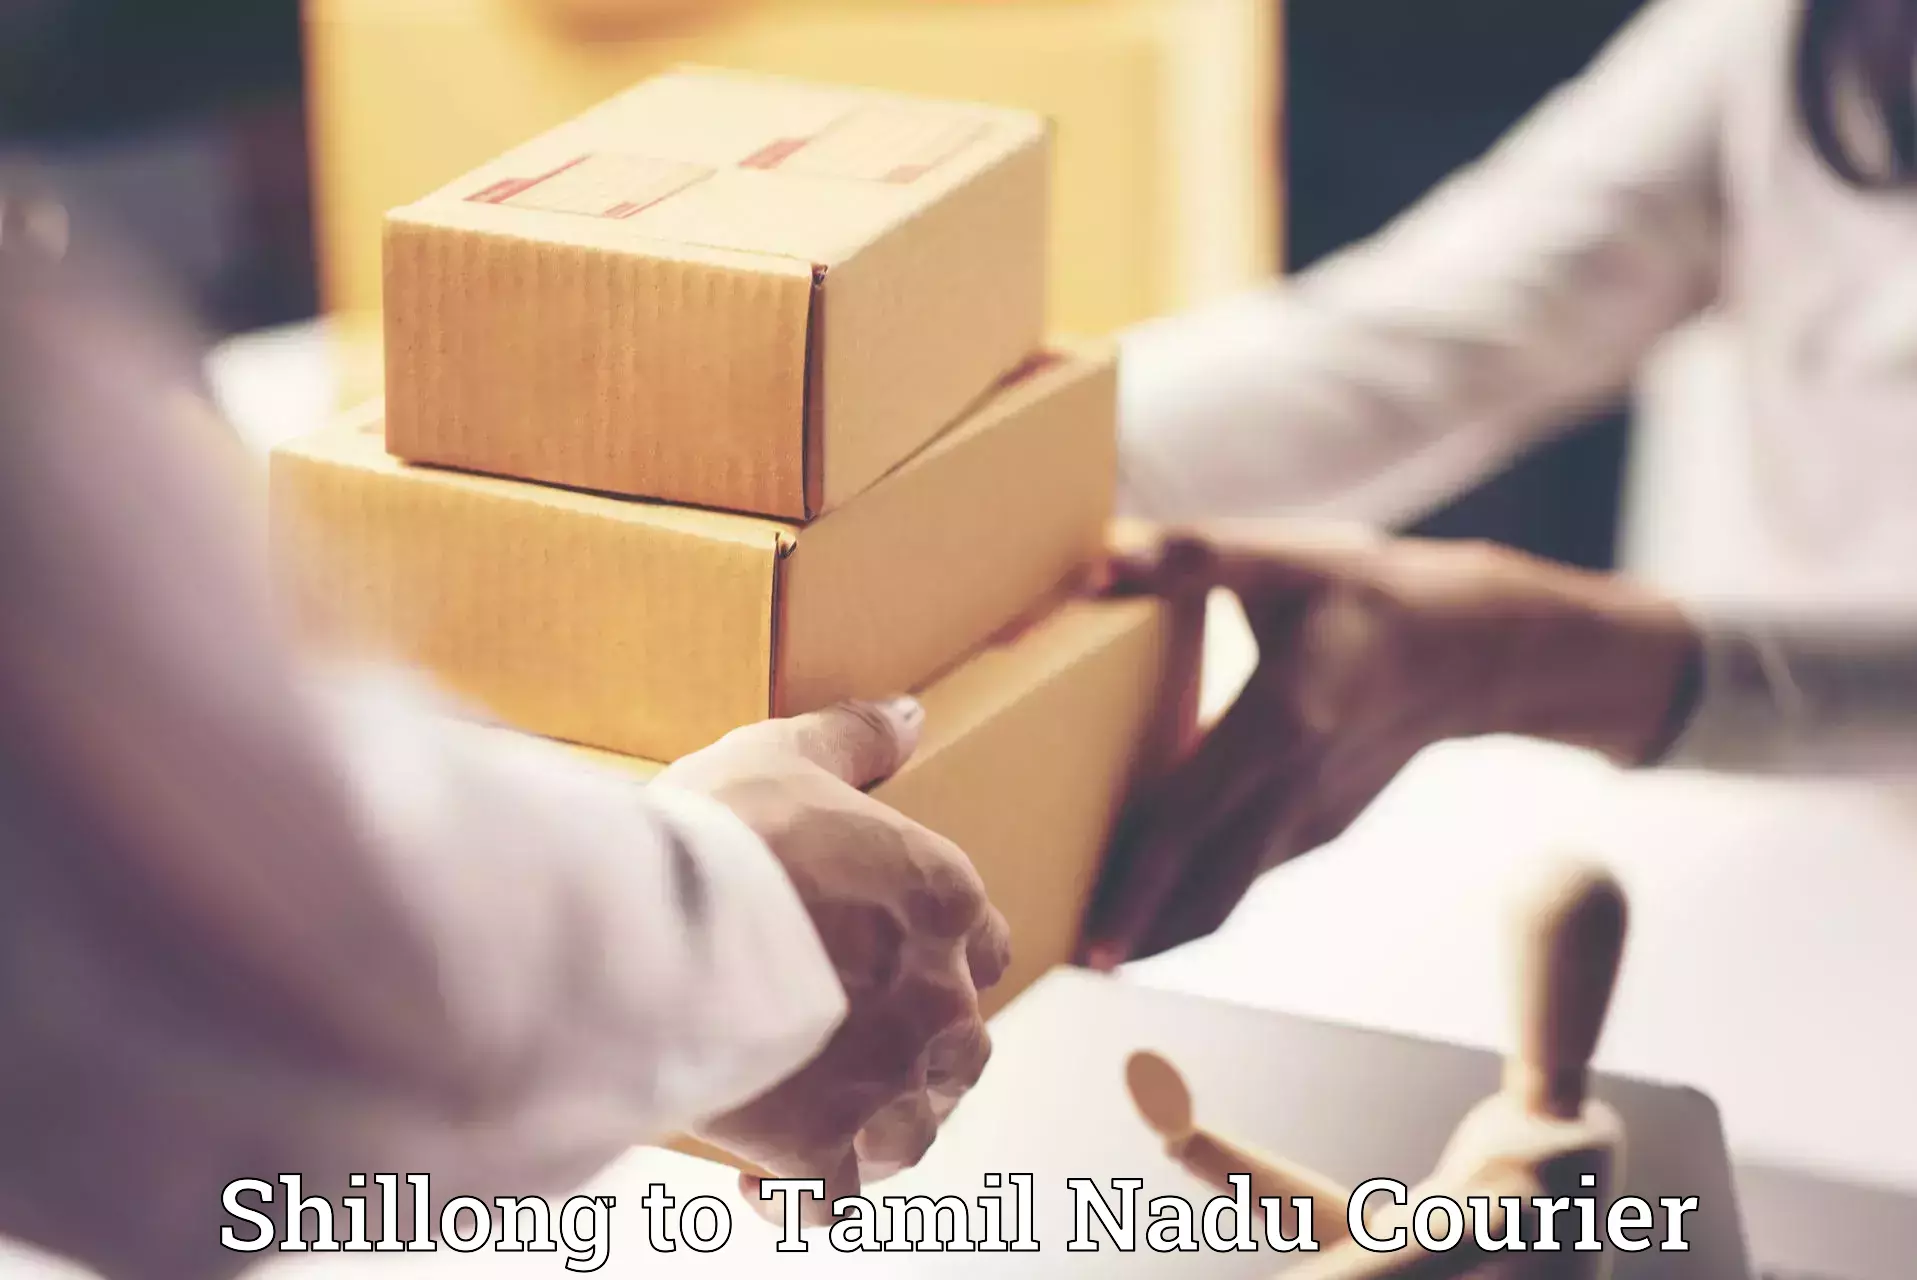 Furniture relocation experts Shillong to Tamil Nadu